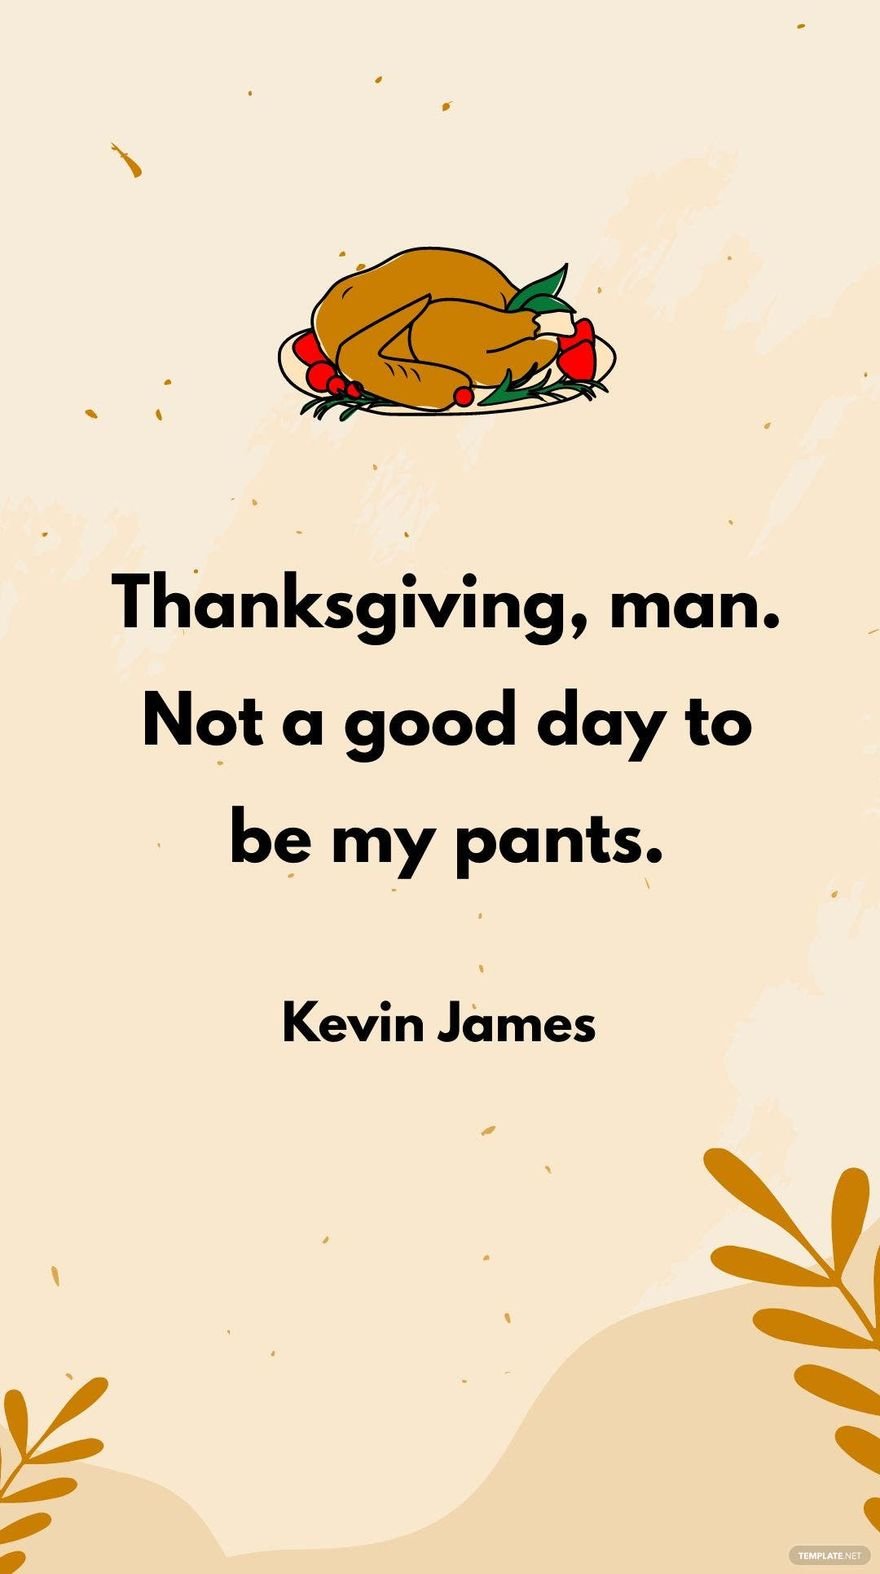 Kevin James - Thanksgiving, man. Not a good day to be my pants.